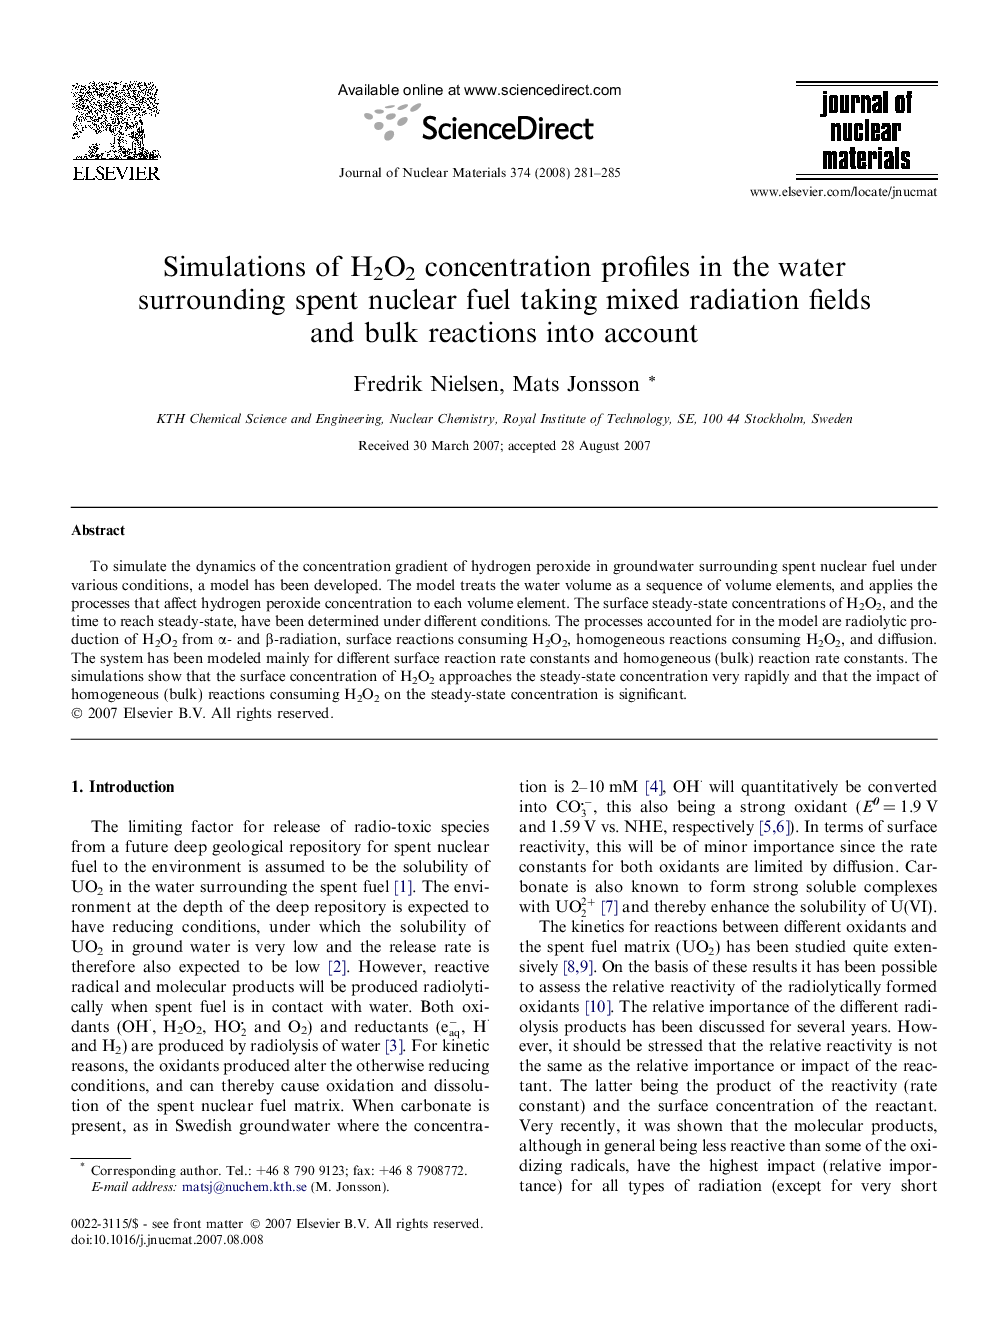 Simulations of H2O2 concentration profiles in the water surrounding spent nuclear fuel taking mixed radiation fields and bulk reactions into account